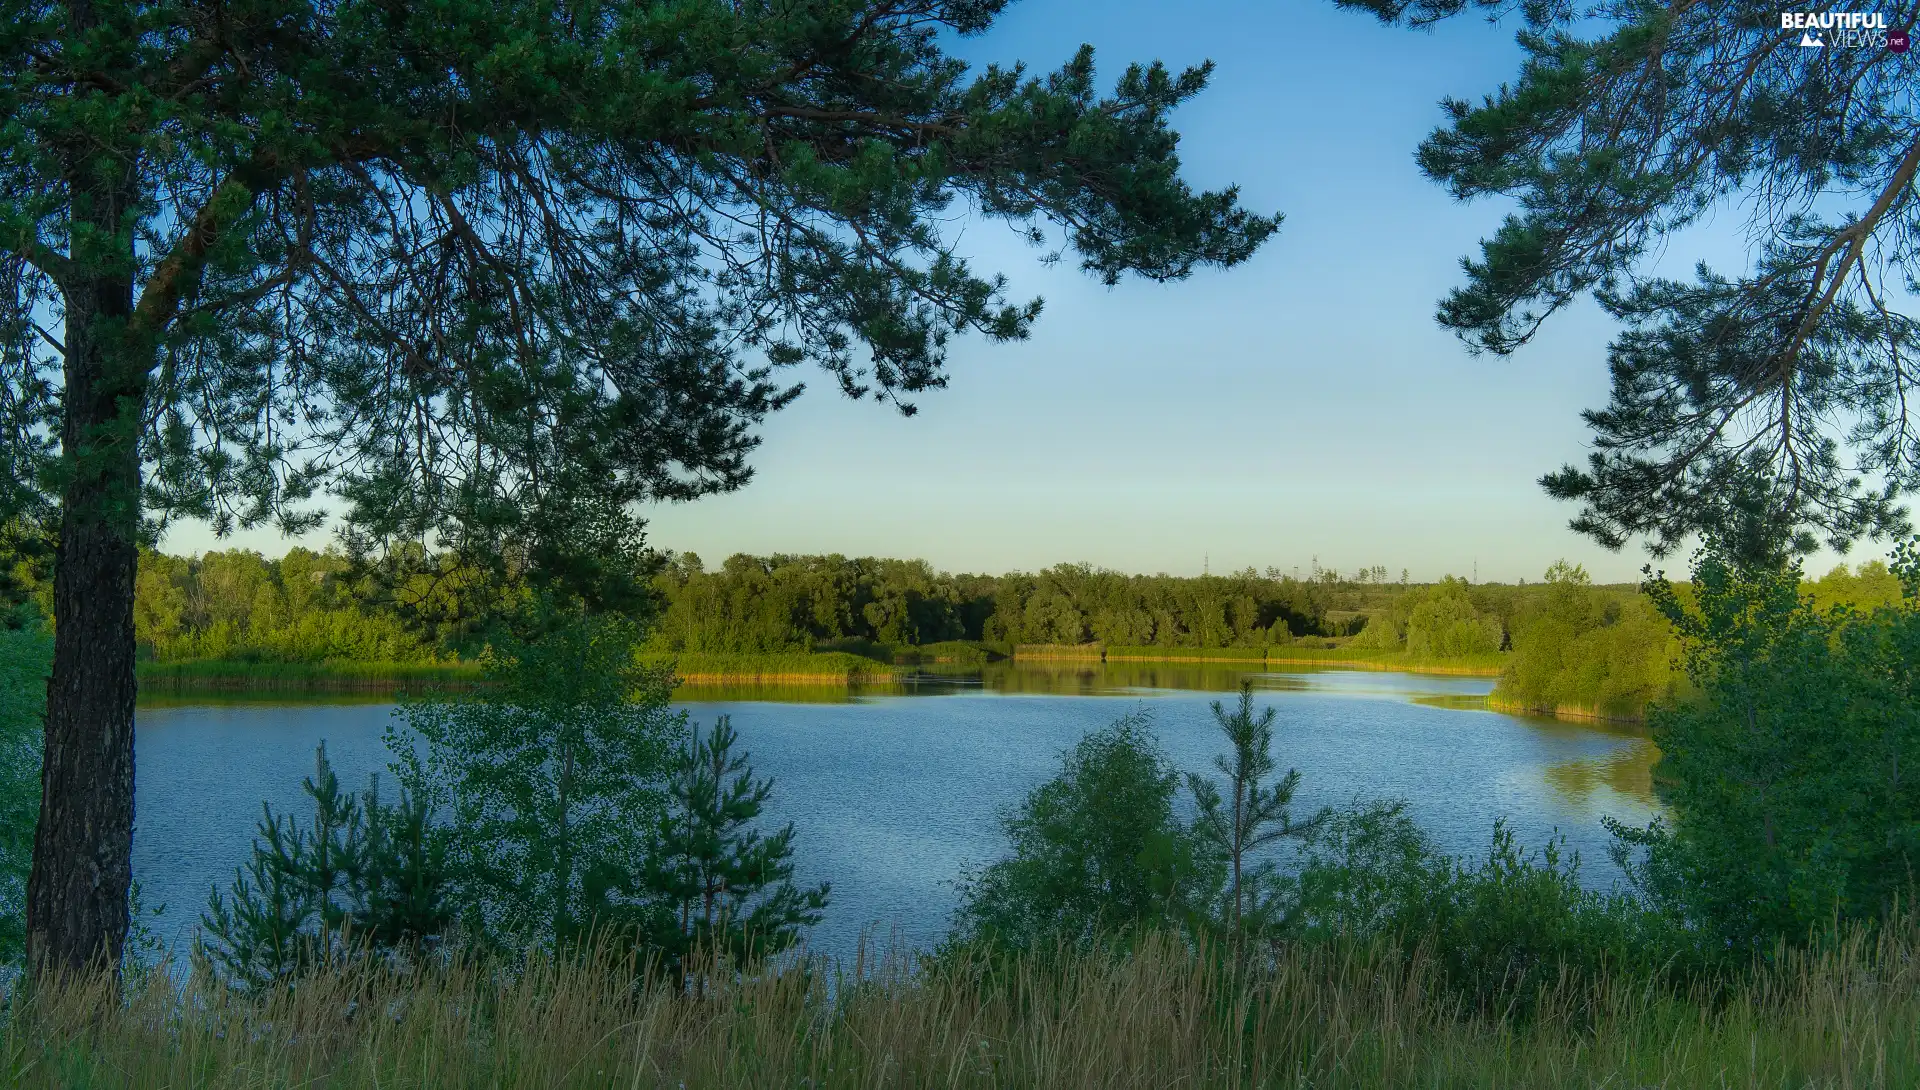 viewes, grass, green ones, trees, lake